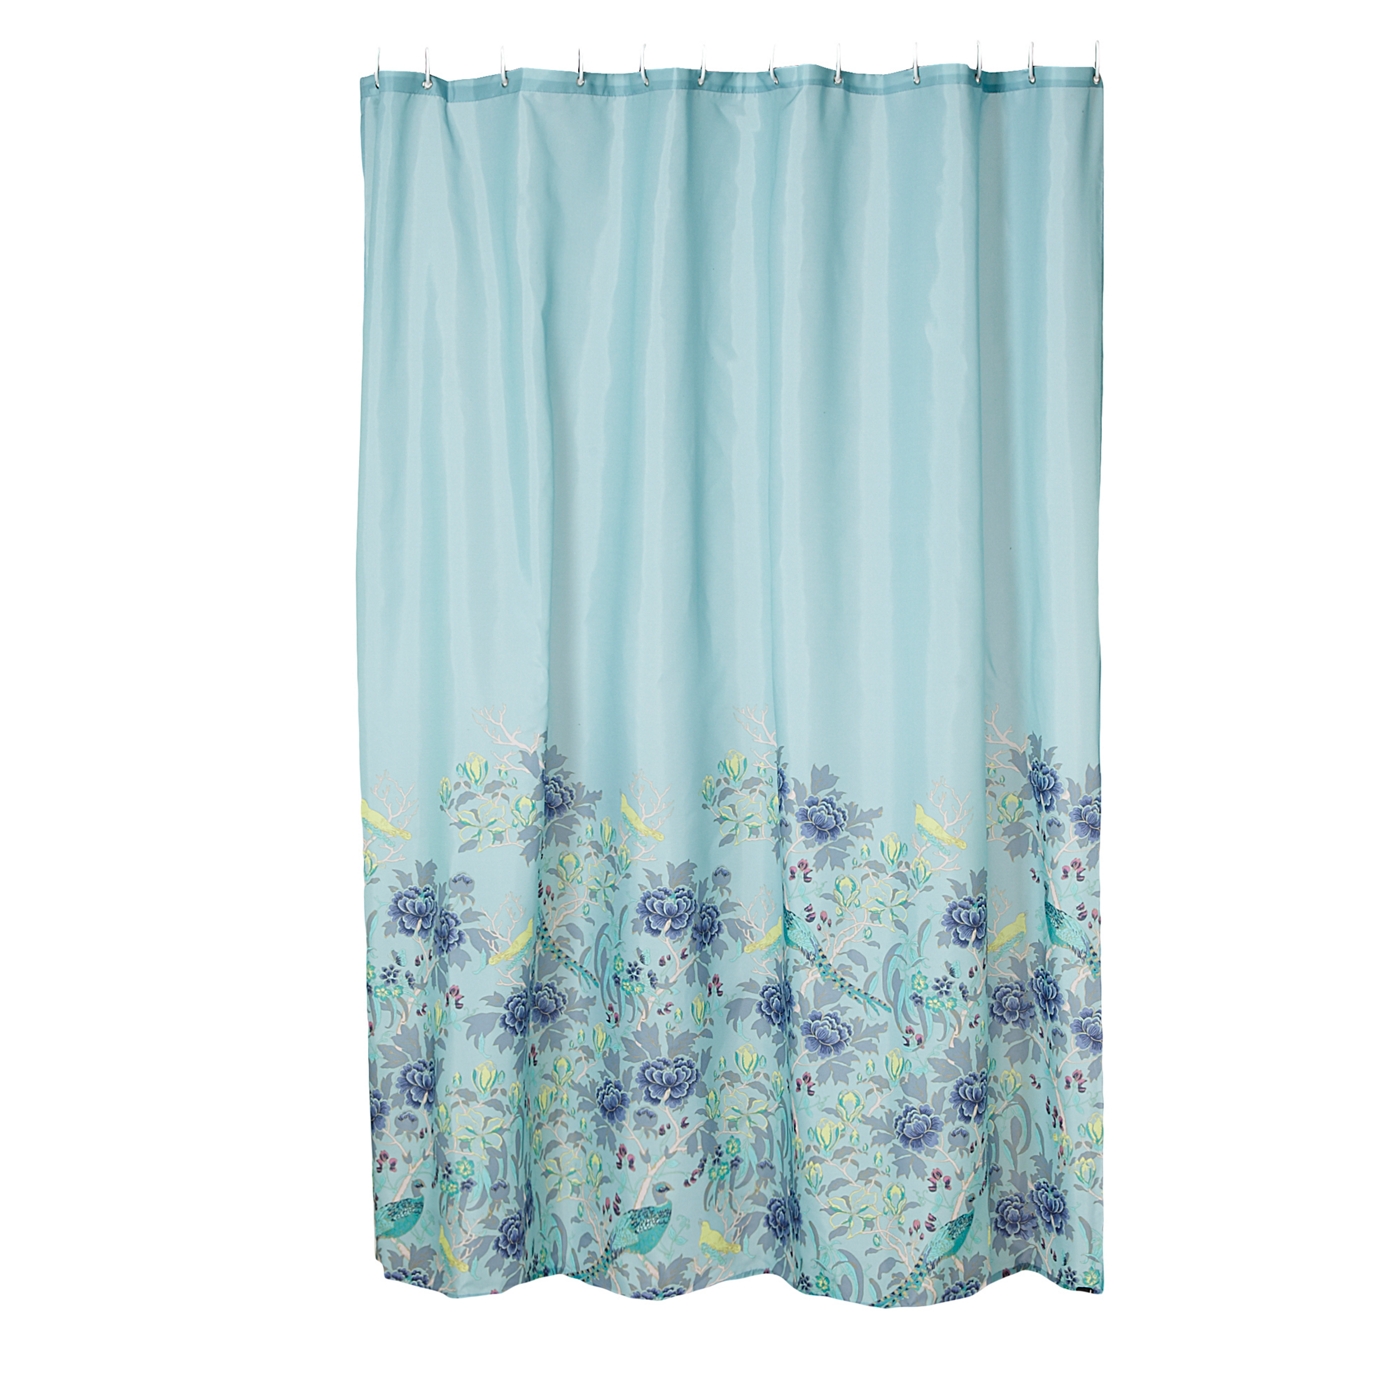 Butterfly Home by Matthew Williamson Turquoise peacock patterned shower curtain